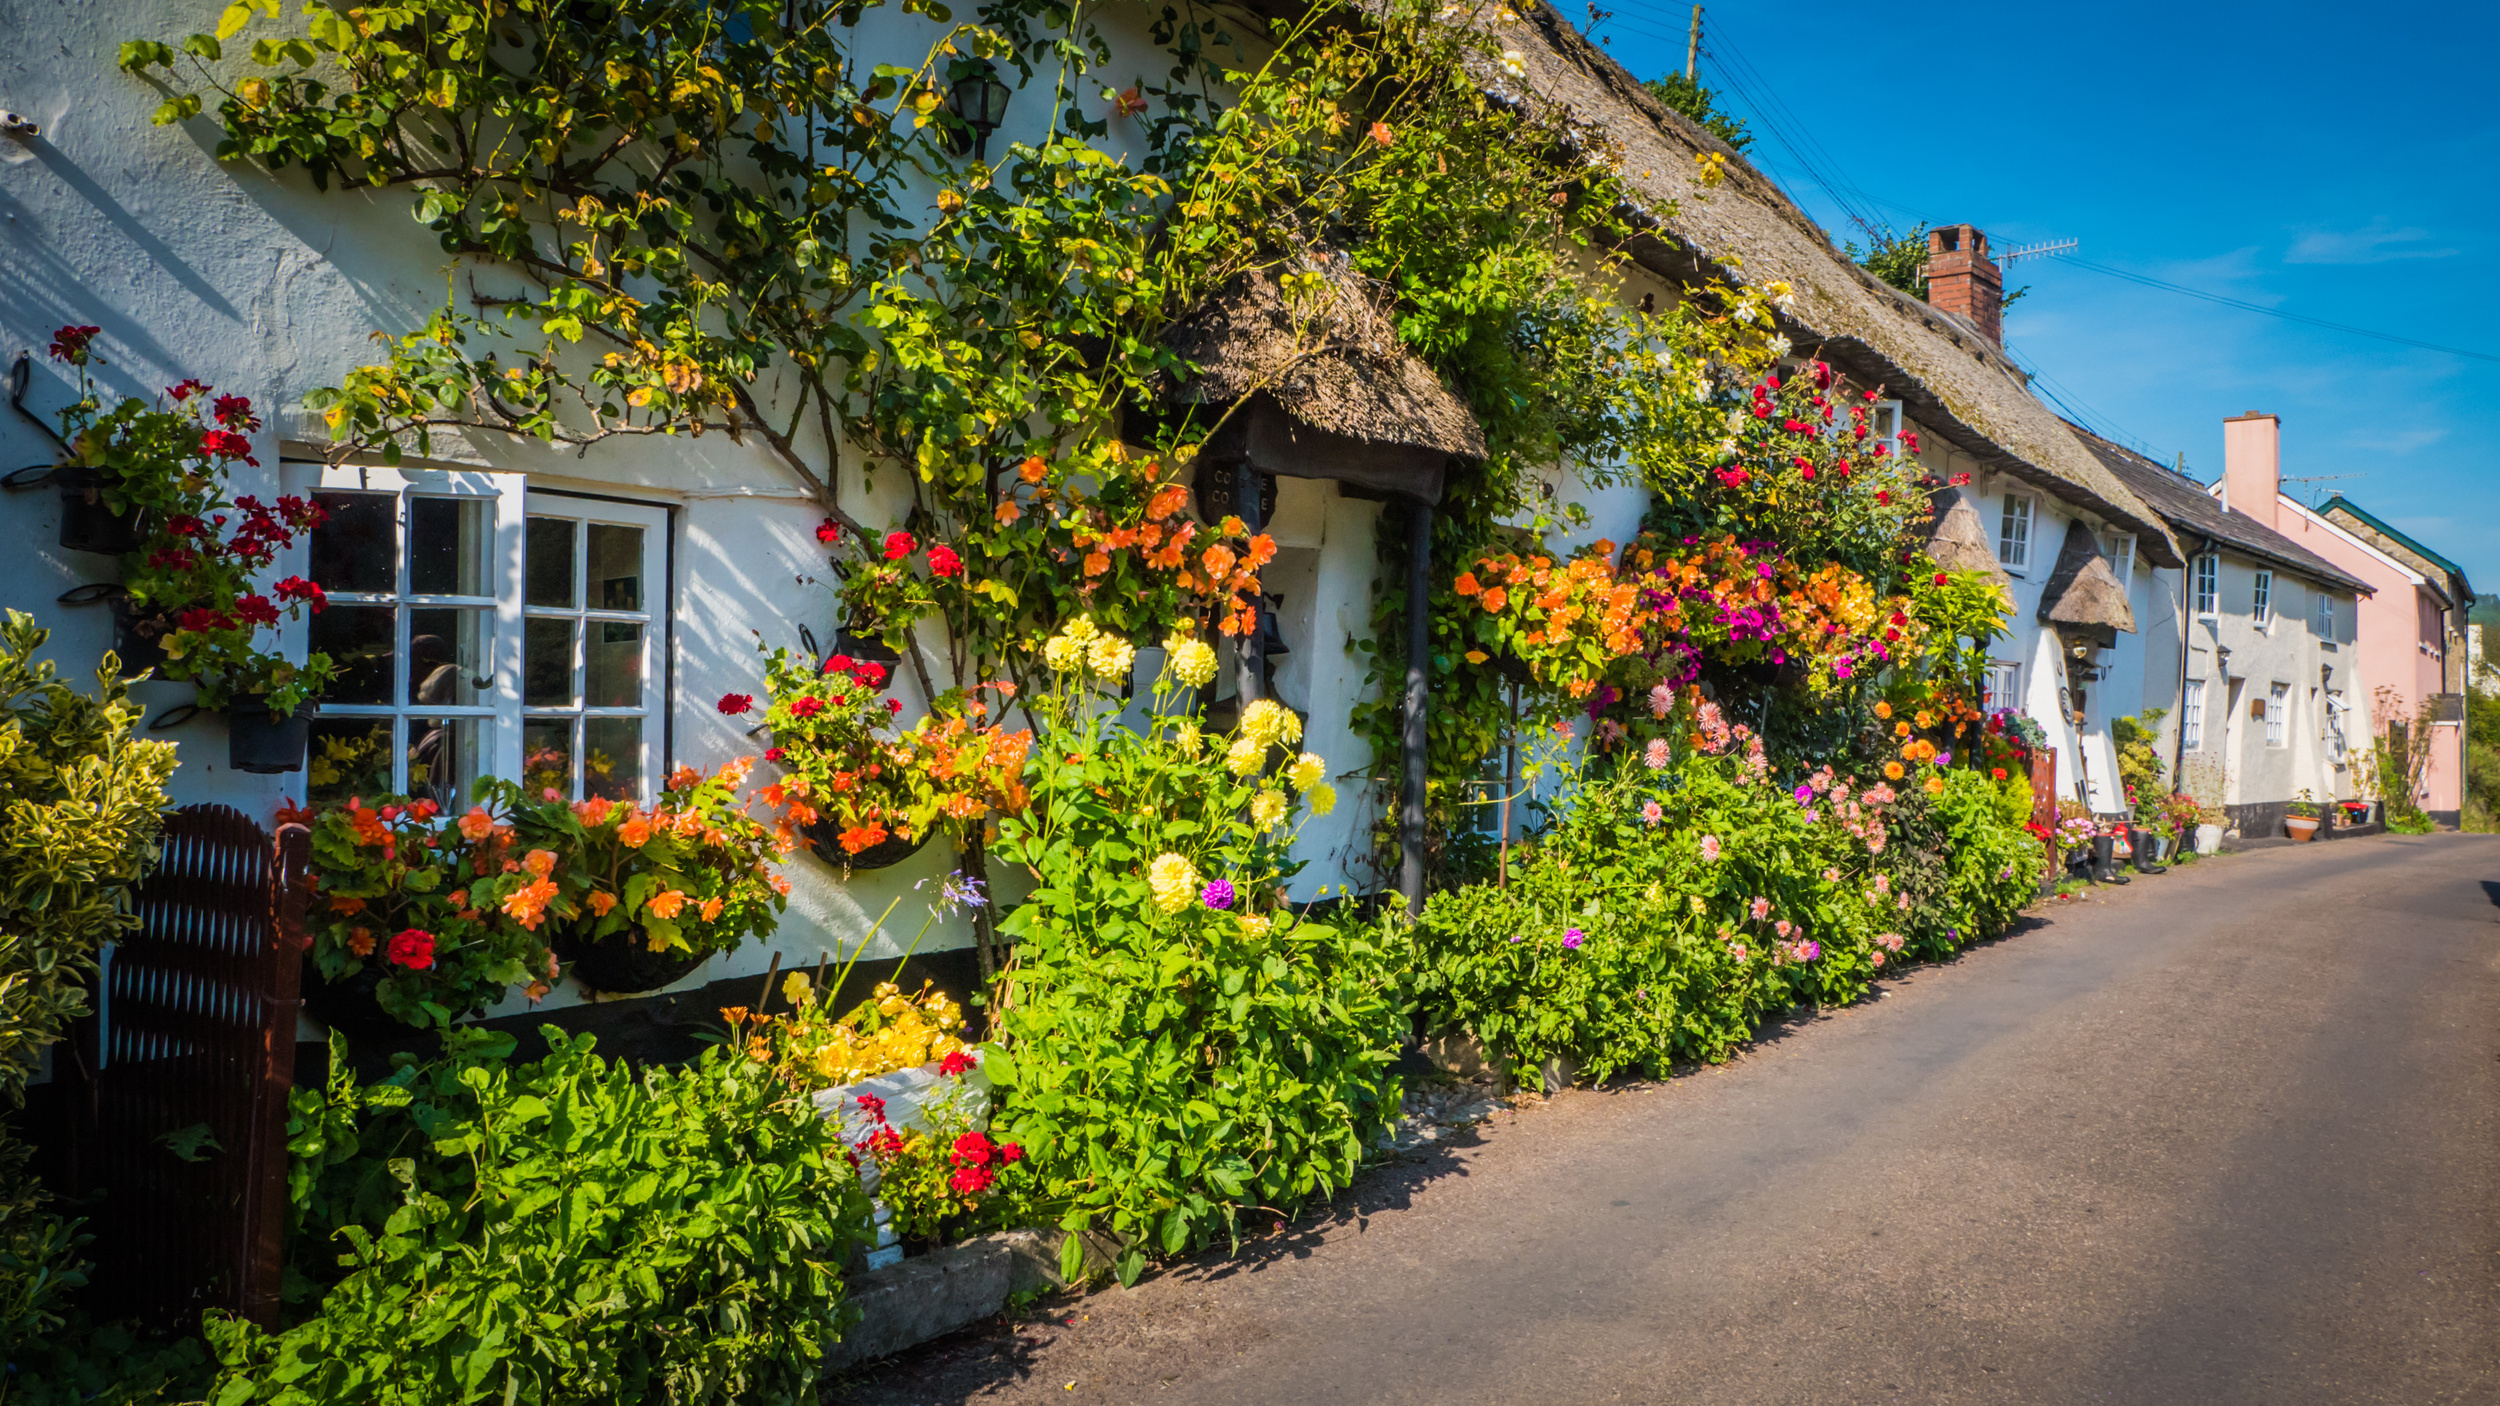 <p>The Cotswolds are known for rolling green hills and thatched cottages that adorn many Instagram explore pages. And in the spring, daffodils bloom all over the English countryside, making it a great time of year to visit.</p><p>You may also like: <a href='https://www.yardbarker.com/lifestyle/articles/21_food_drink_items_that_have_been_around_for_thousands_of_years/s1__38178665'>21 food & drink items that have been around for thousands of years</a></p>